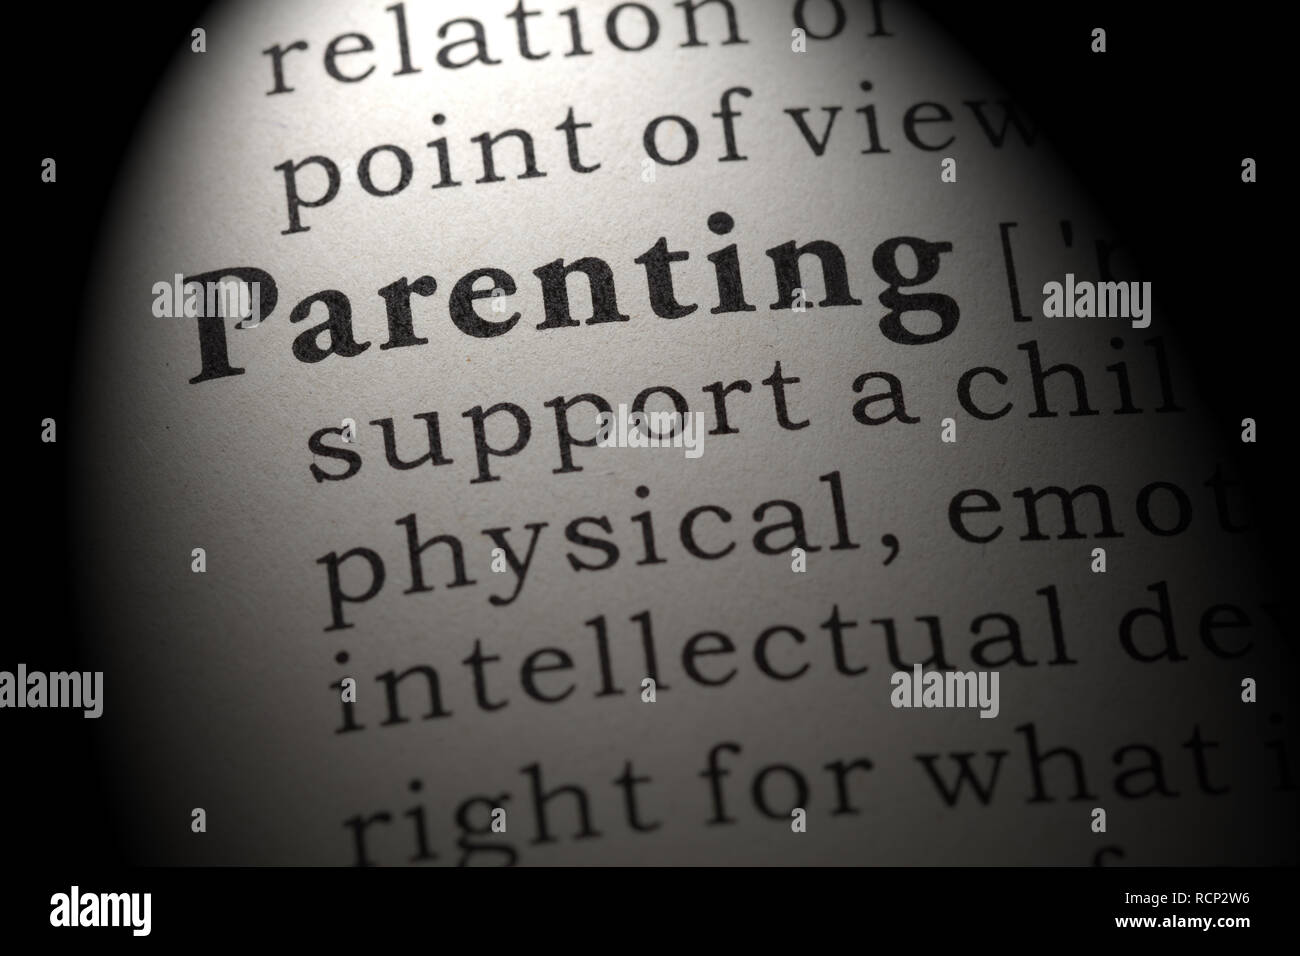 Fake Dictionary, Dictionary definition of the word Parenting. including key descriptive words. Stock Photo